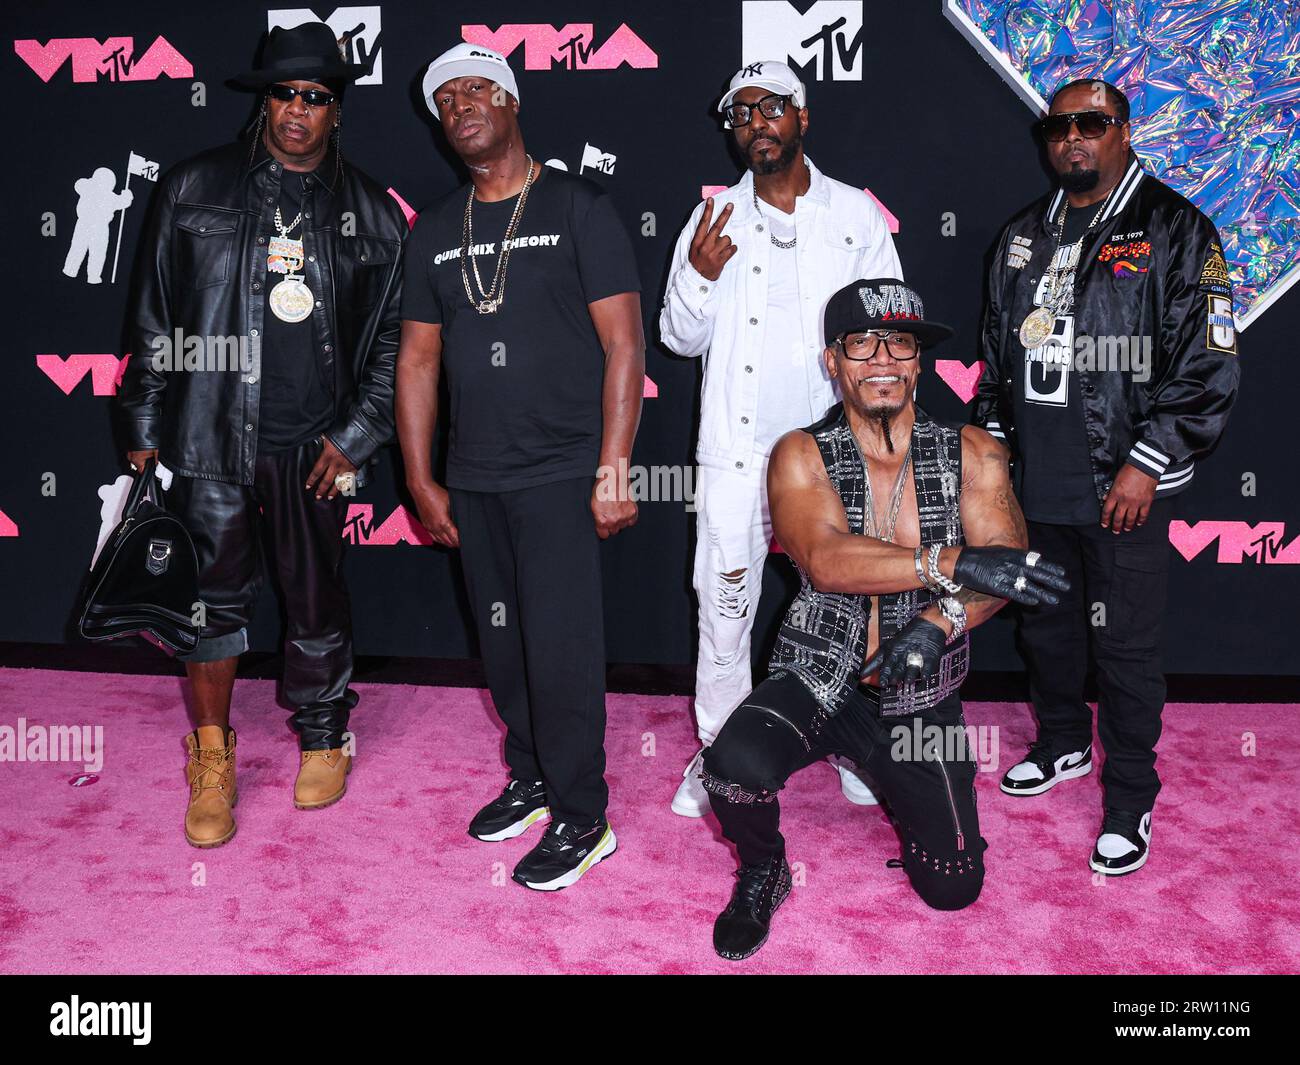 Photo: Grandmaster Flash Attends the 65th Grammy Awards in Los Angeles -  LAP20230205296 